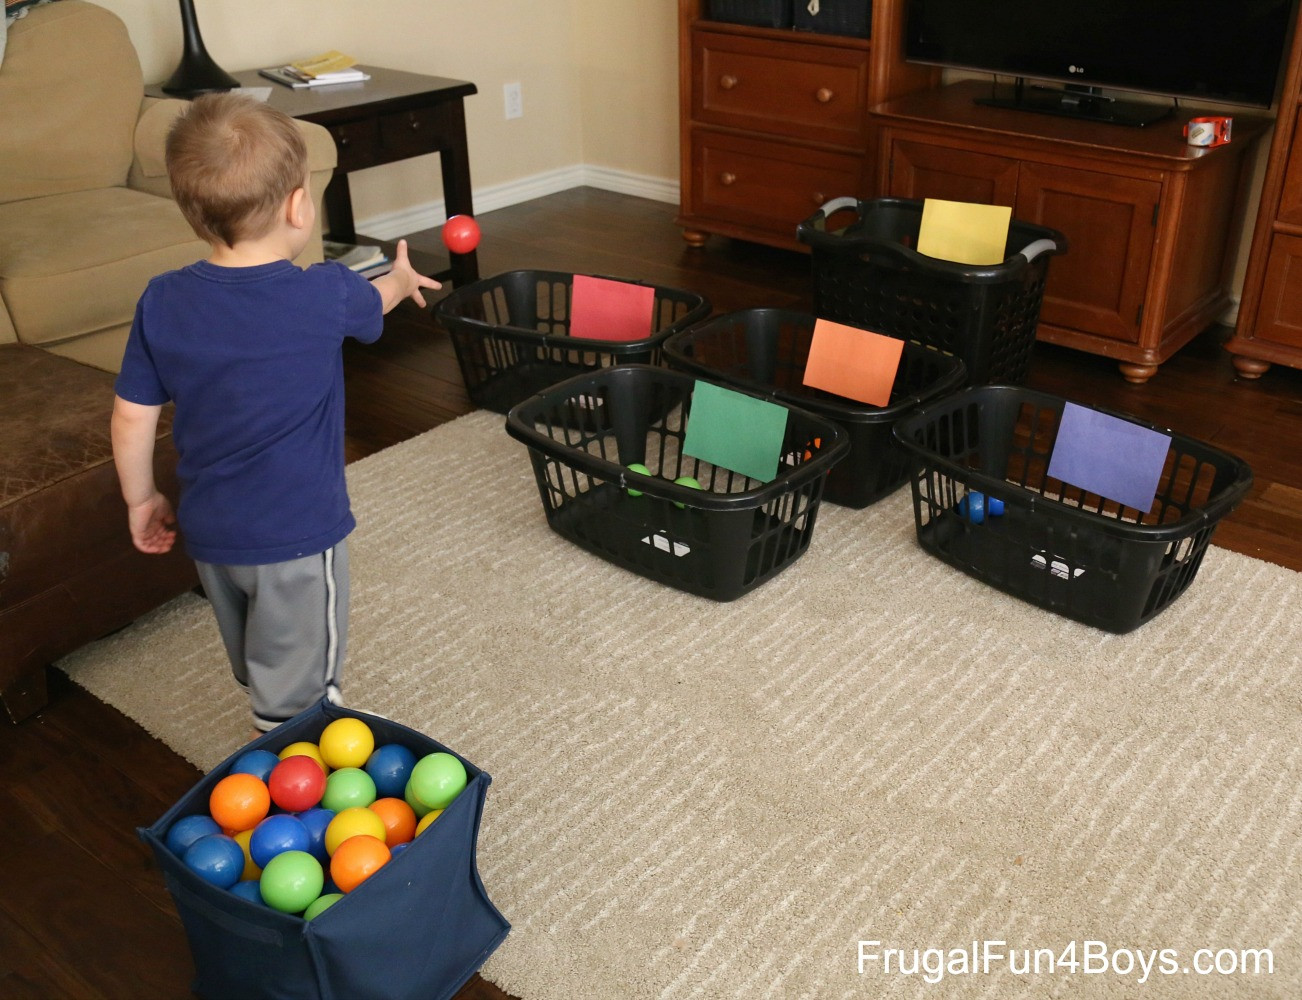 Fun Indoor Games For Kids
 10 Ball Games for Kids Ideas for Active Play Indoors